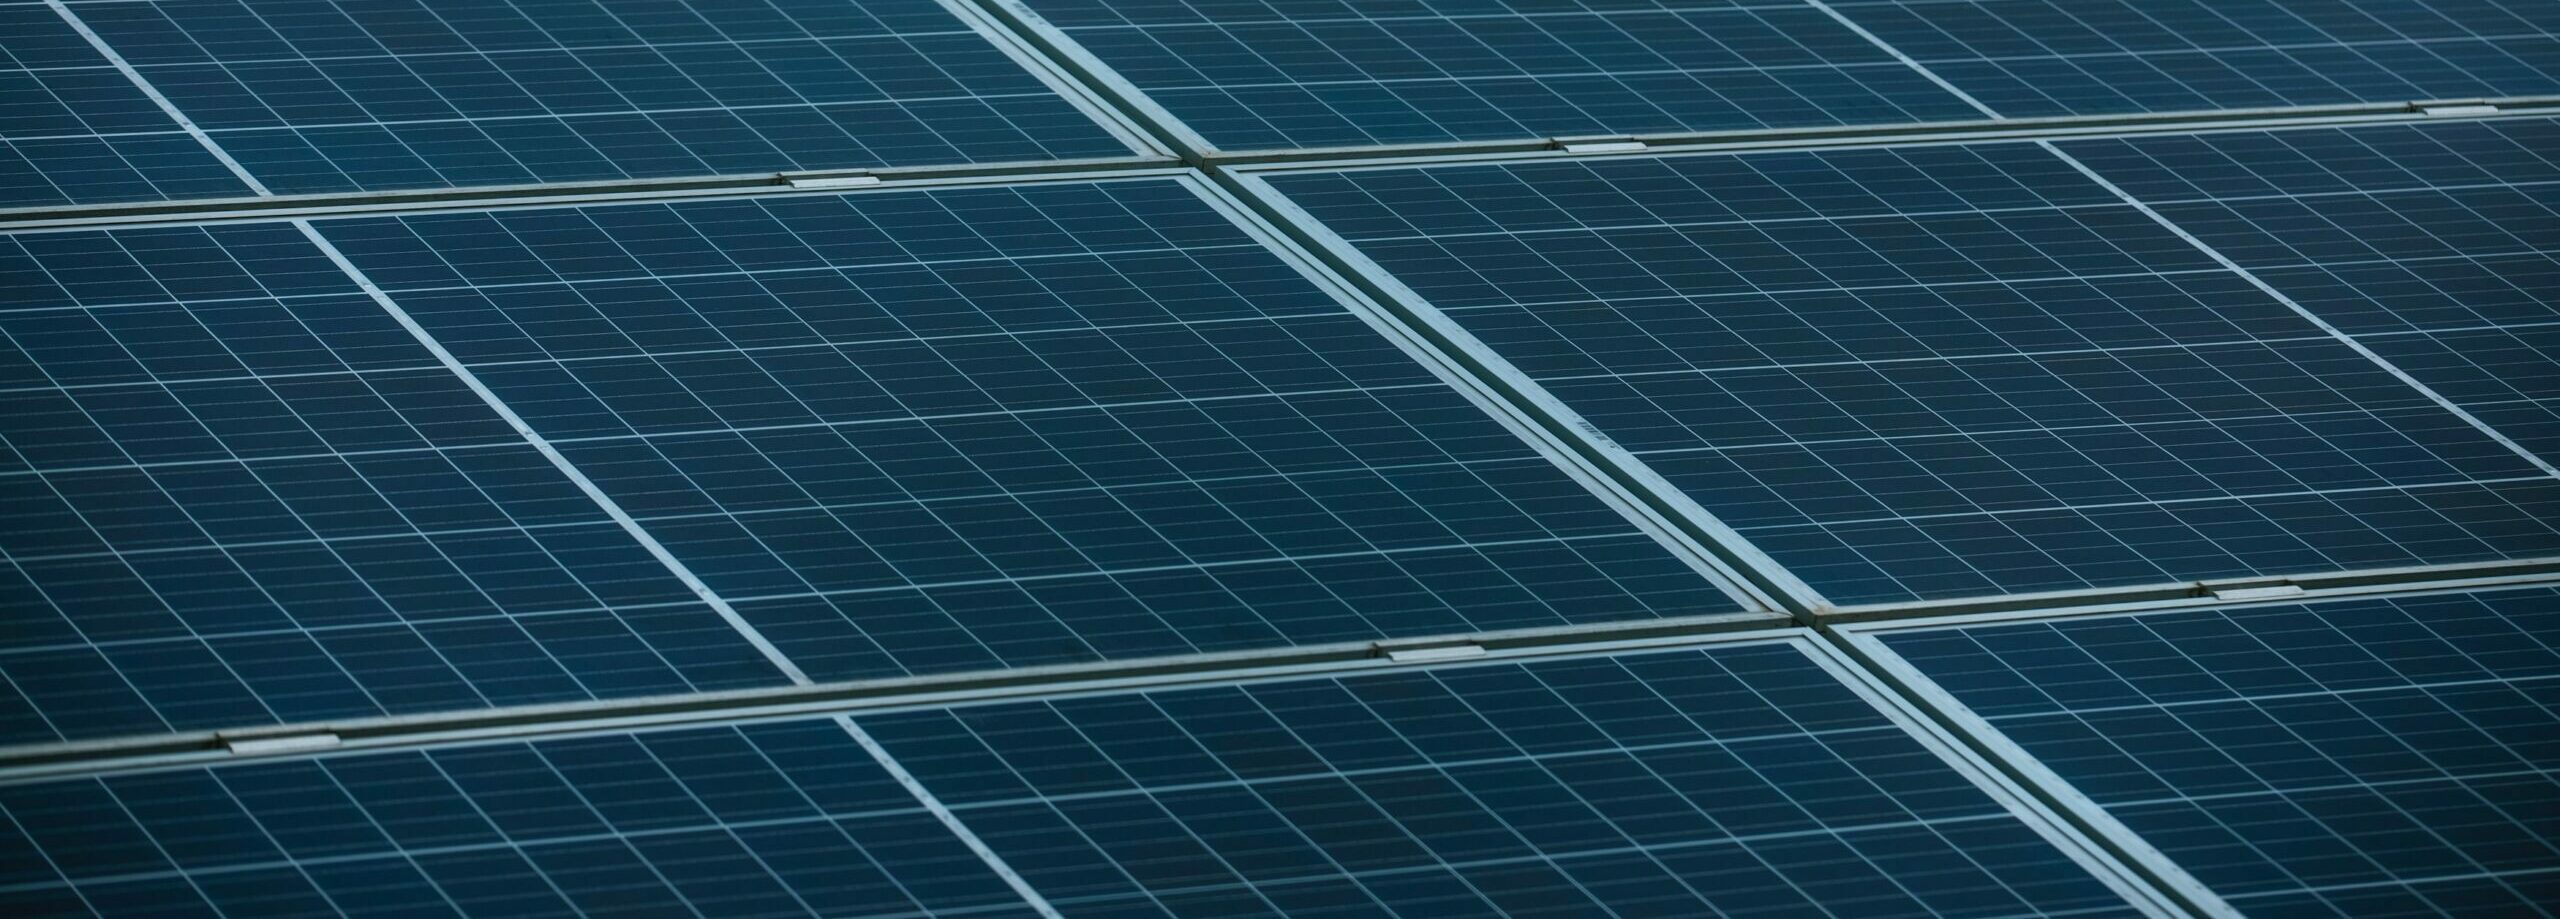 Turnkey solar park construction from Europe